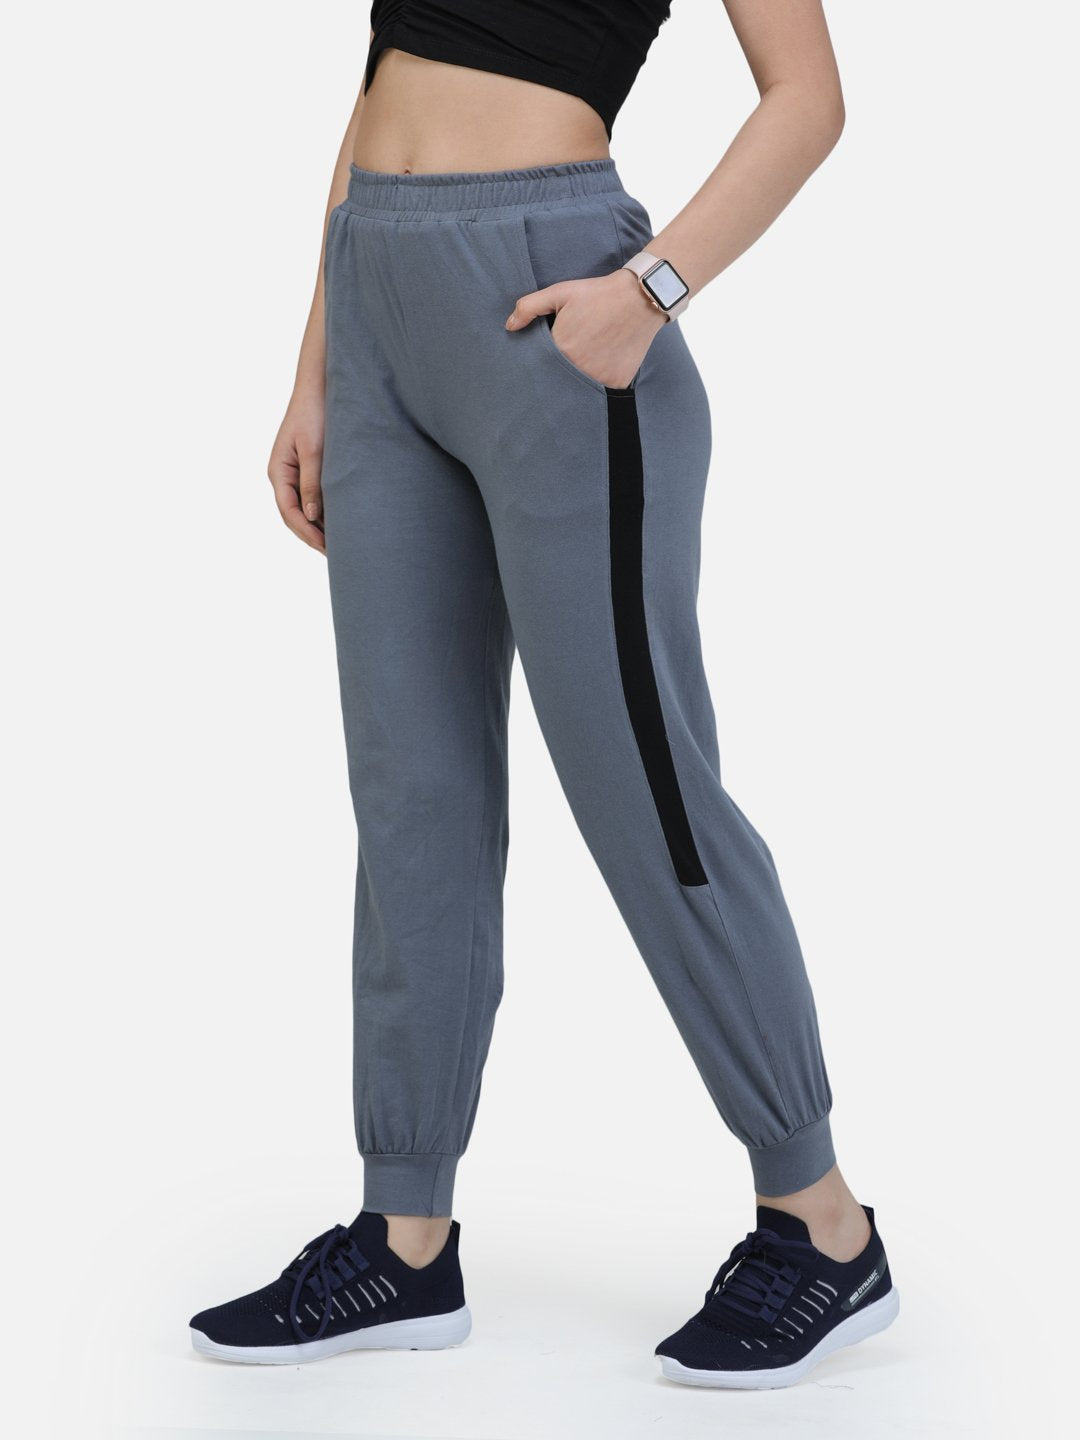 SCORPIUS GREY TRACKPANT WITH BLACK STRIPES